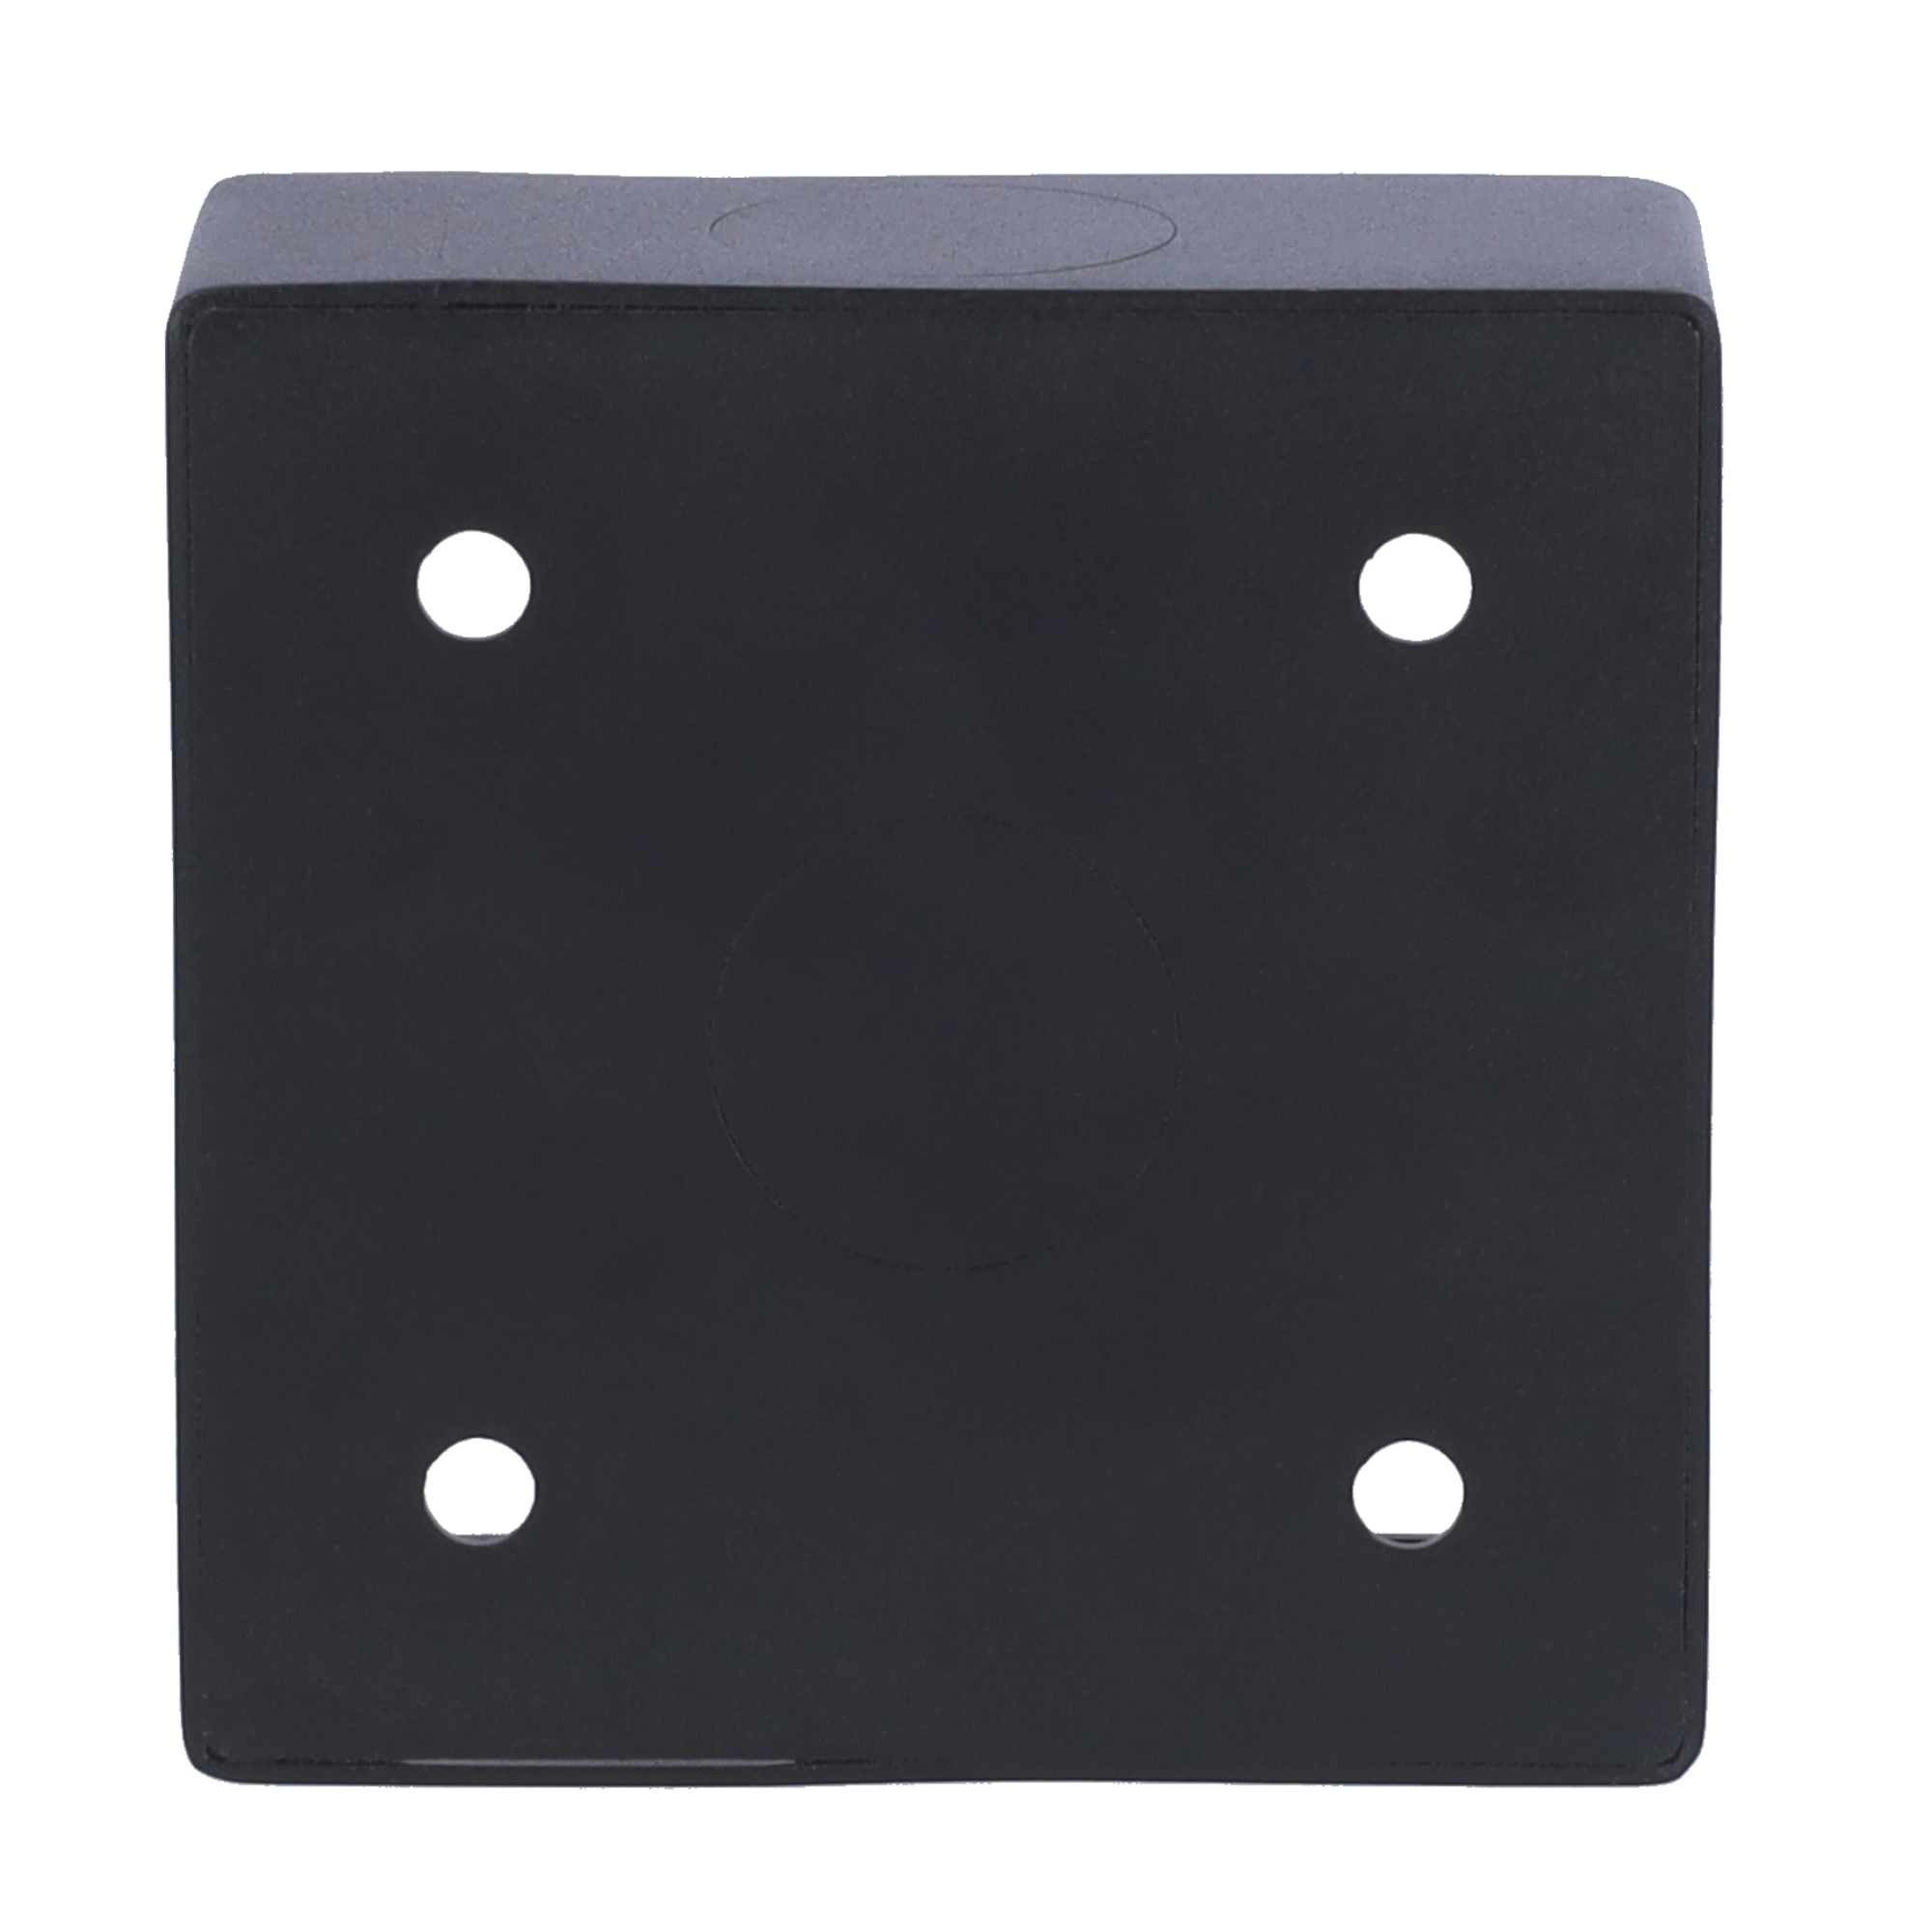 Connection box - Compatible with video intercoms - Surface installation - Made of steel - Strong and durable - Holes for connections